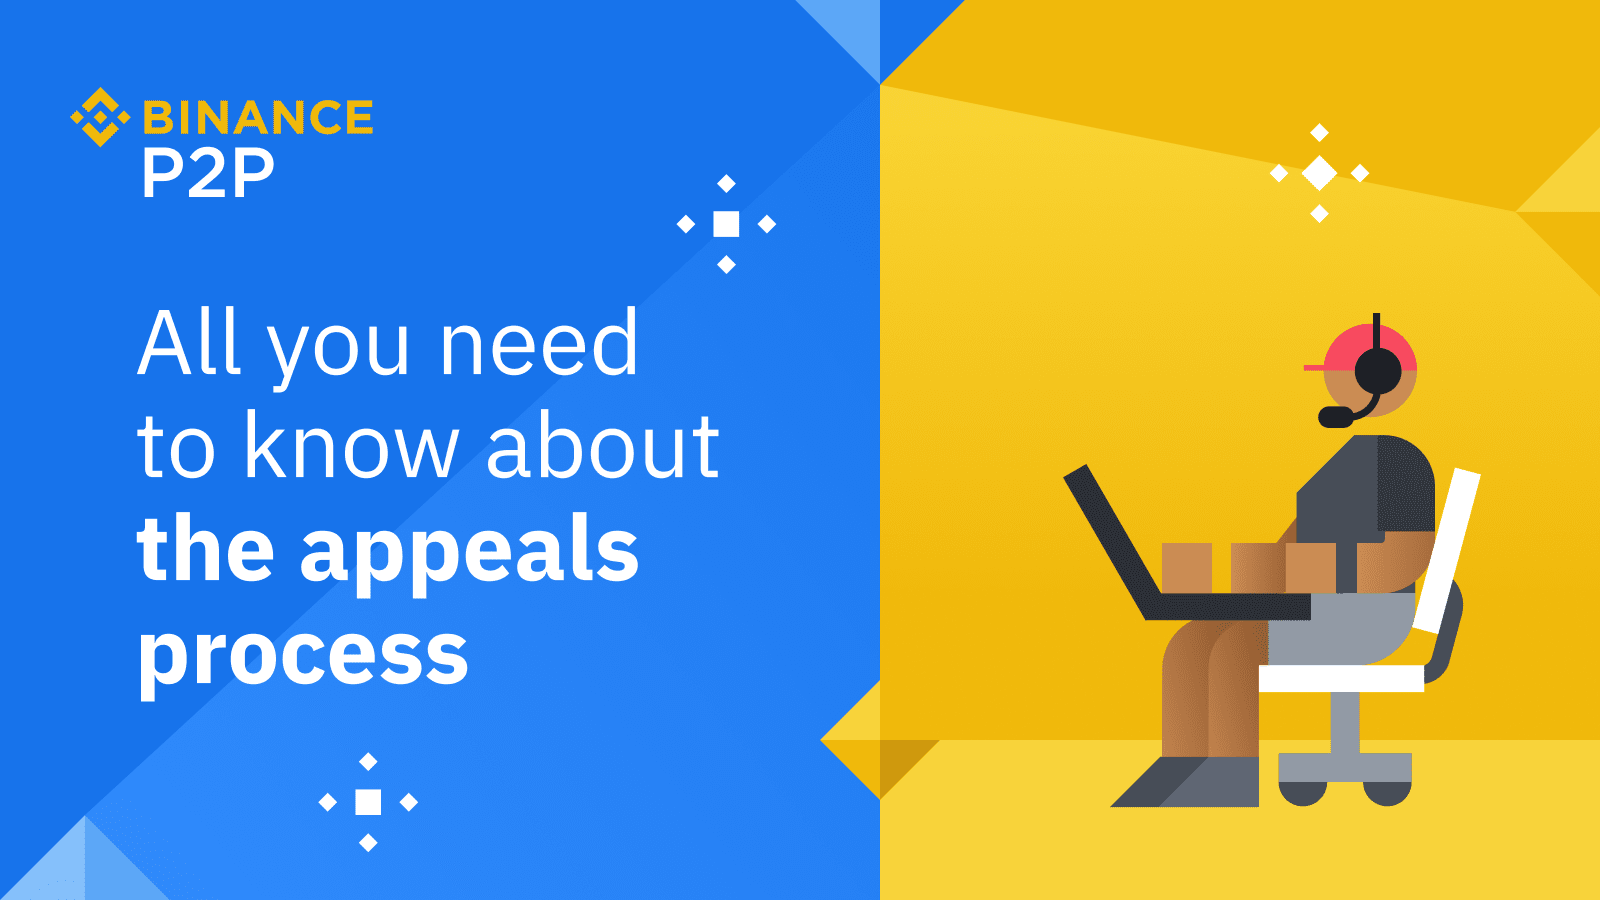 All You Need to Know About the Binance P2P Appeals Process